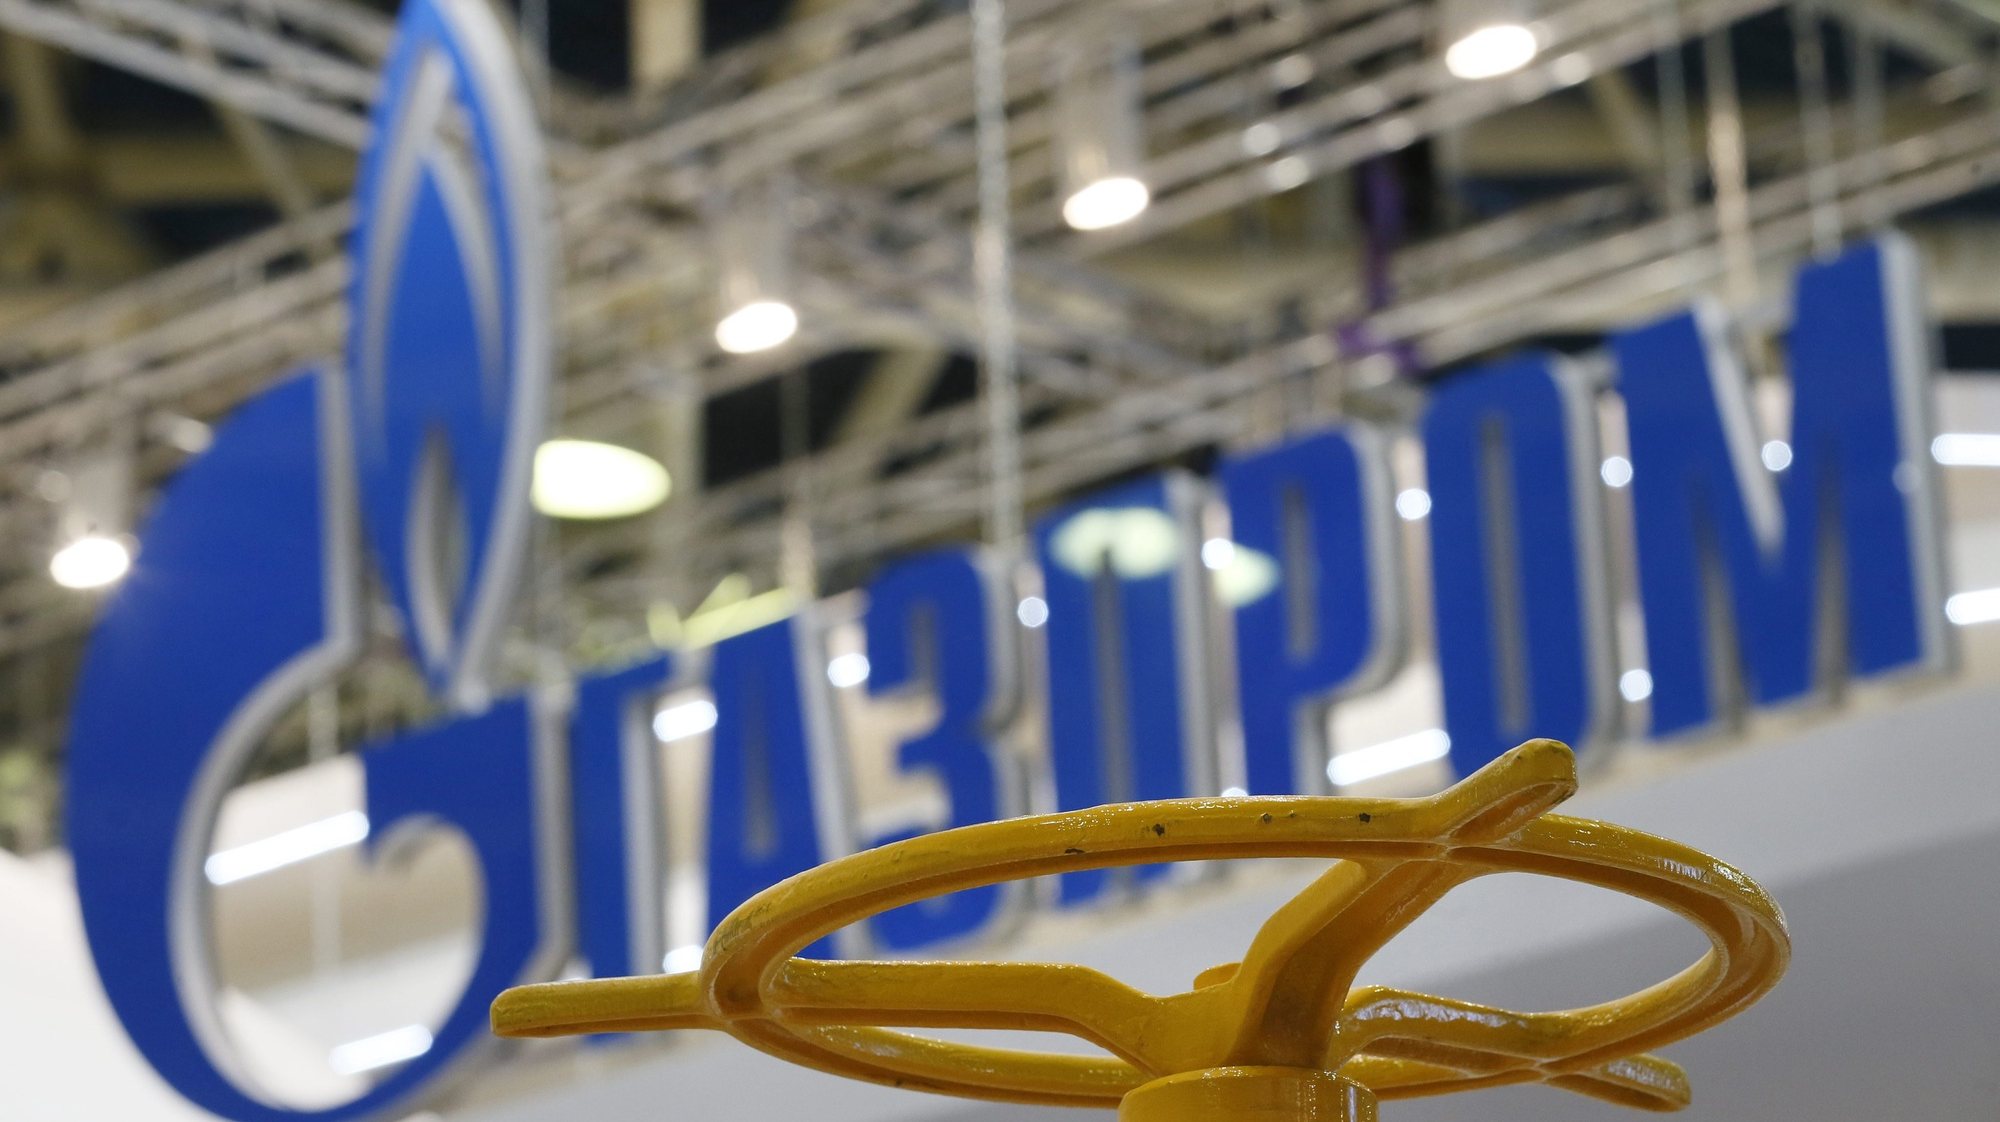 epa05265562 A logo of the Russian Gazprom company during the 16th Neftegaz International Exhibition in Moscow, Russia, 18 April 2016. The 16th Neftegaz International Exhibition is attended by 750 participants from 33 countries.  EPA/SERGEI ILNITSKY